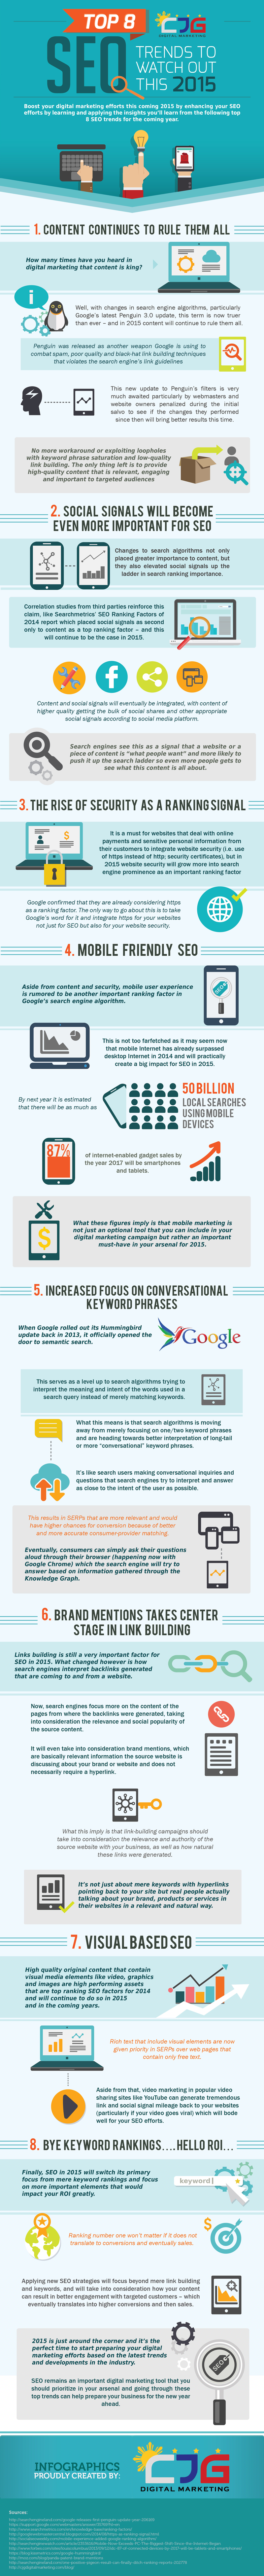 Top 8 SEO Trends to Watch Out this 2015 (Infographic) - An Infographic from CJG Digital Marketing